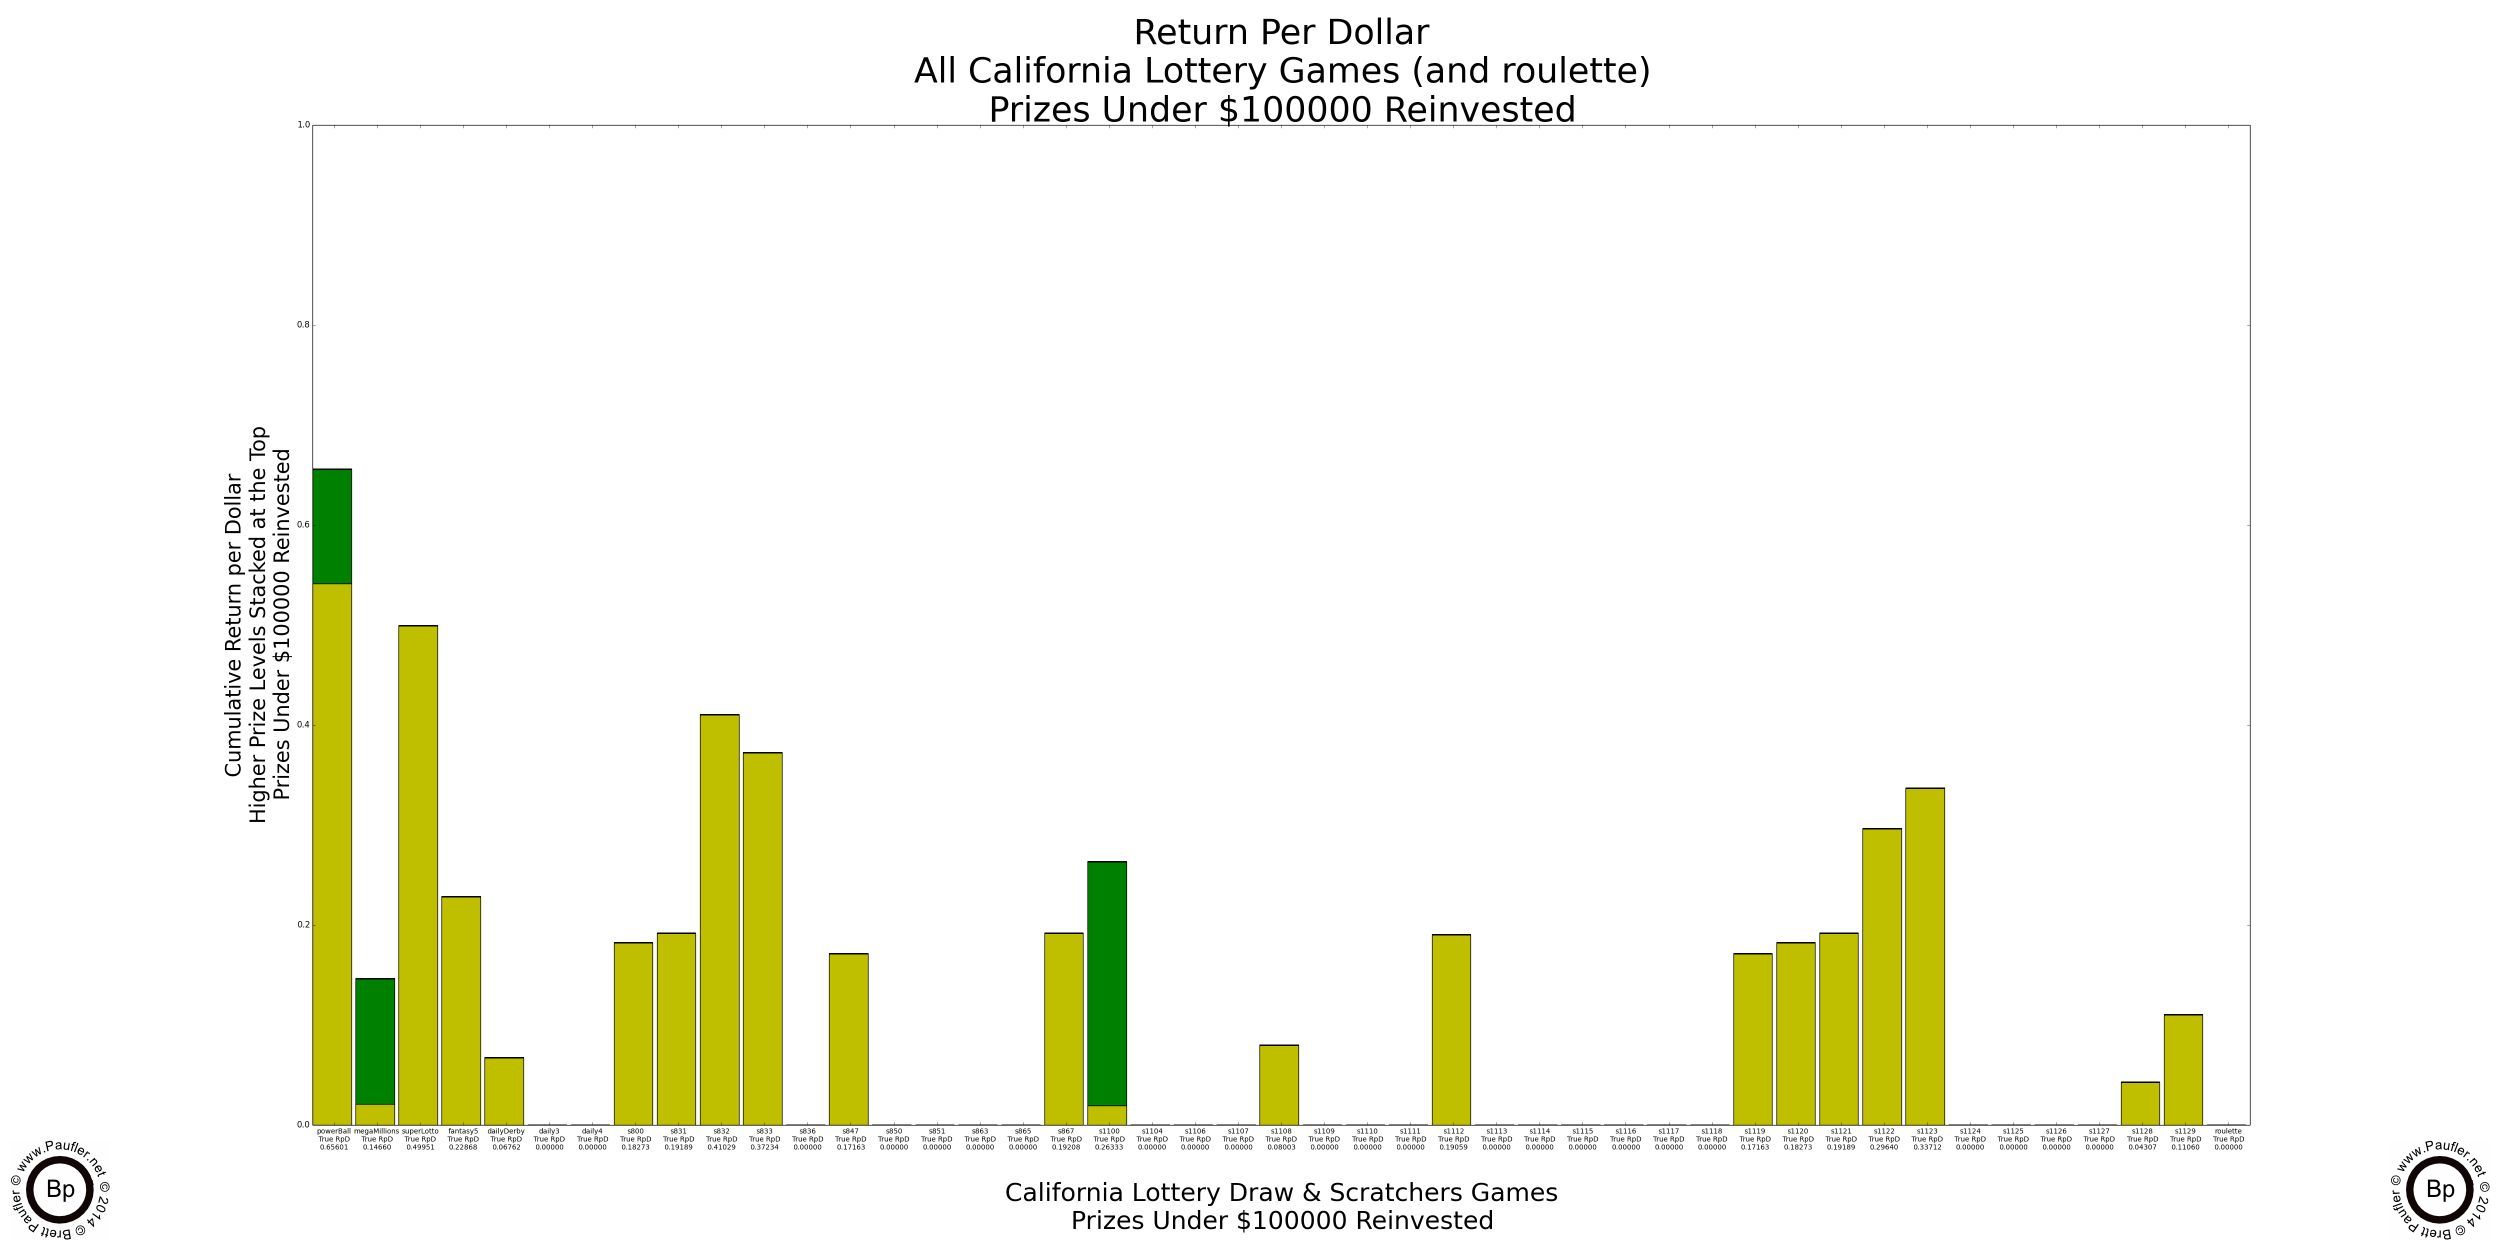 Graph of California Lottery Return per Dollar with Prizes below $100,000 Reinvested